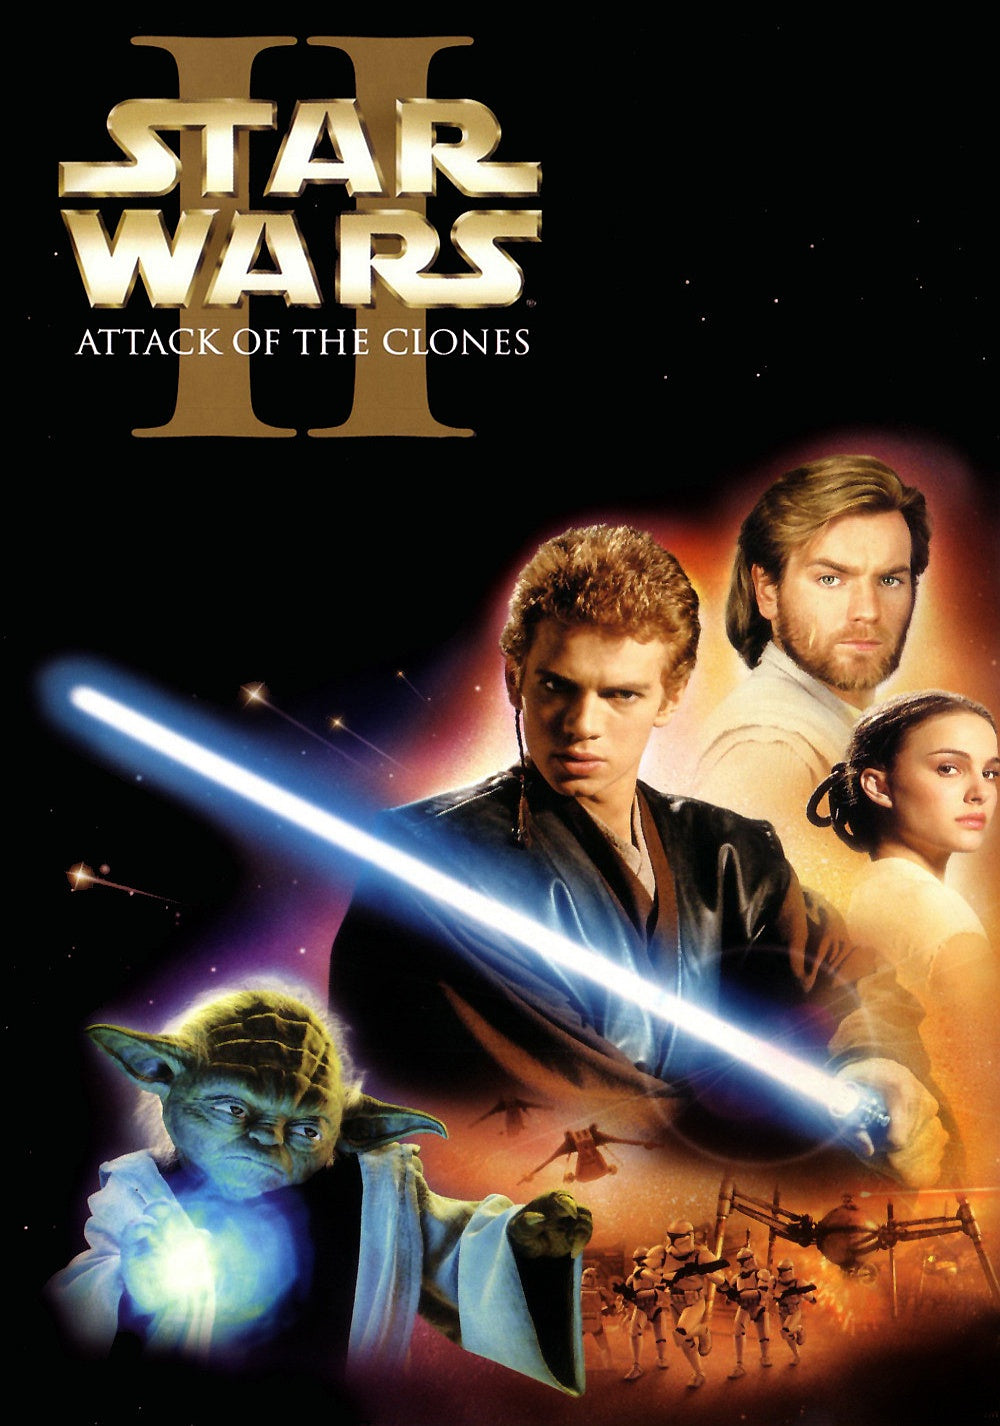 Star Wars: Episode II - Attack of the Clones VHS (2002)